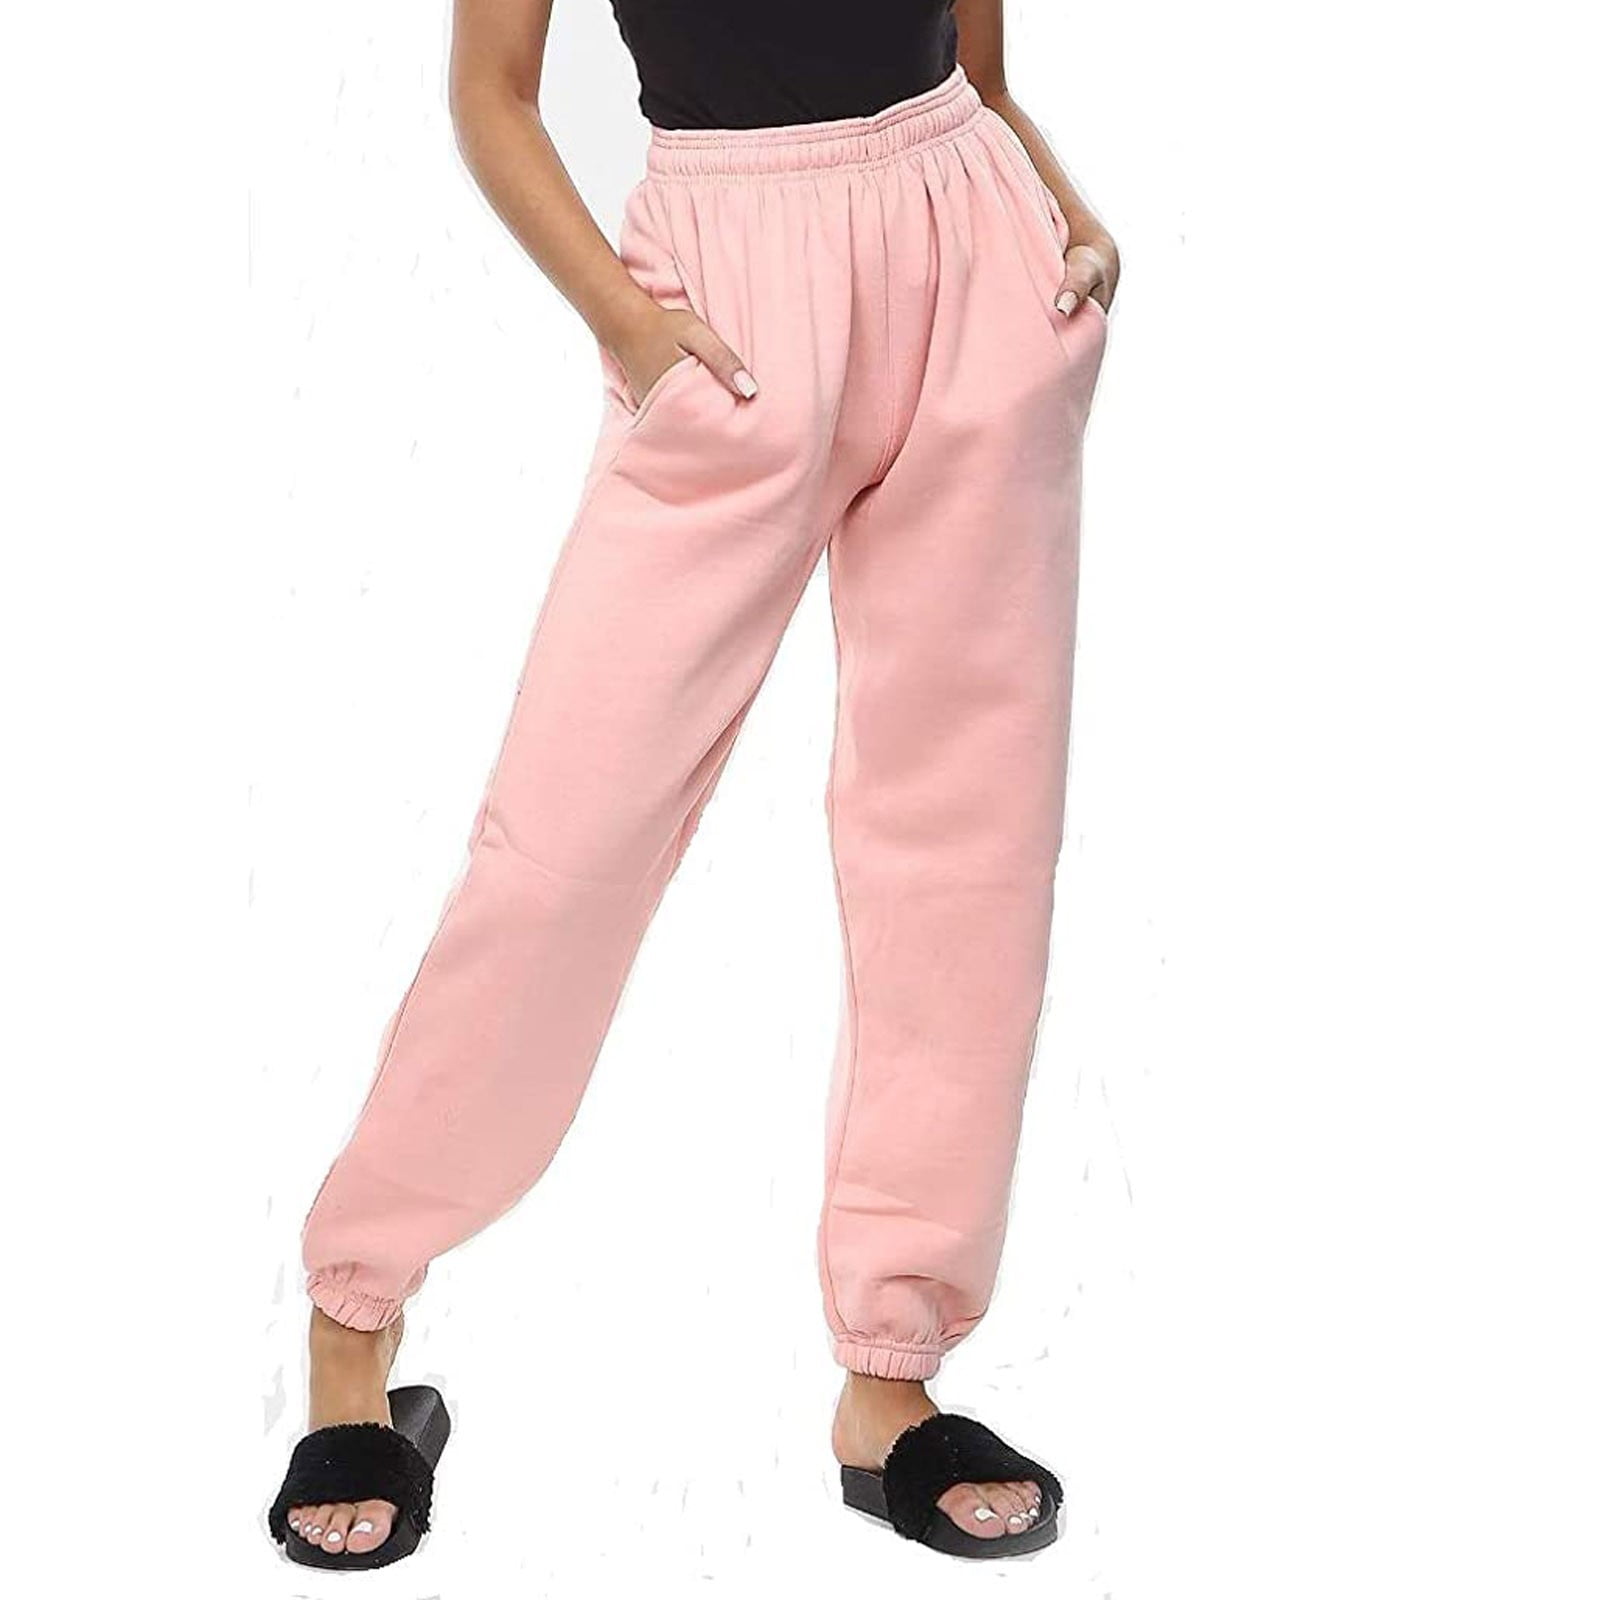 New Ladies Full Length Long Cherry Berry Trouser Pant Cotton Stretchy  Casual | eBay